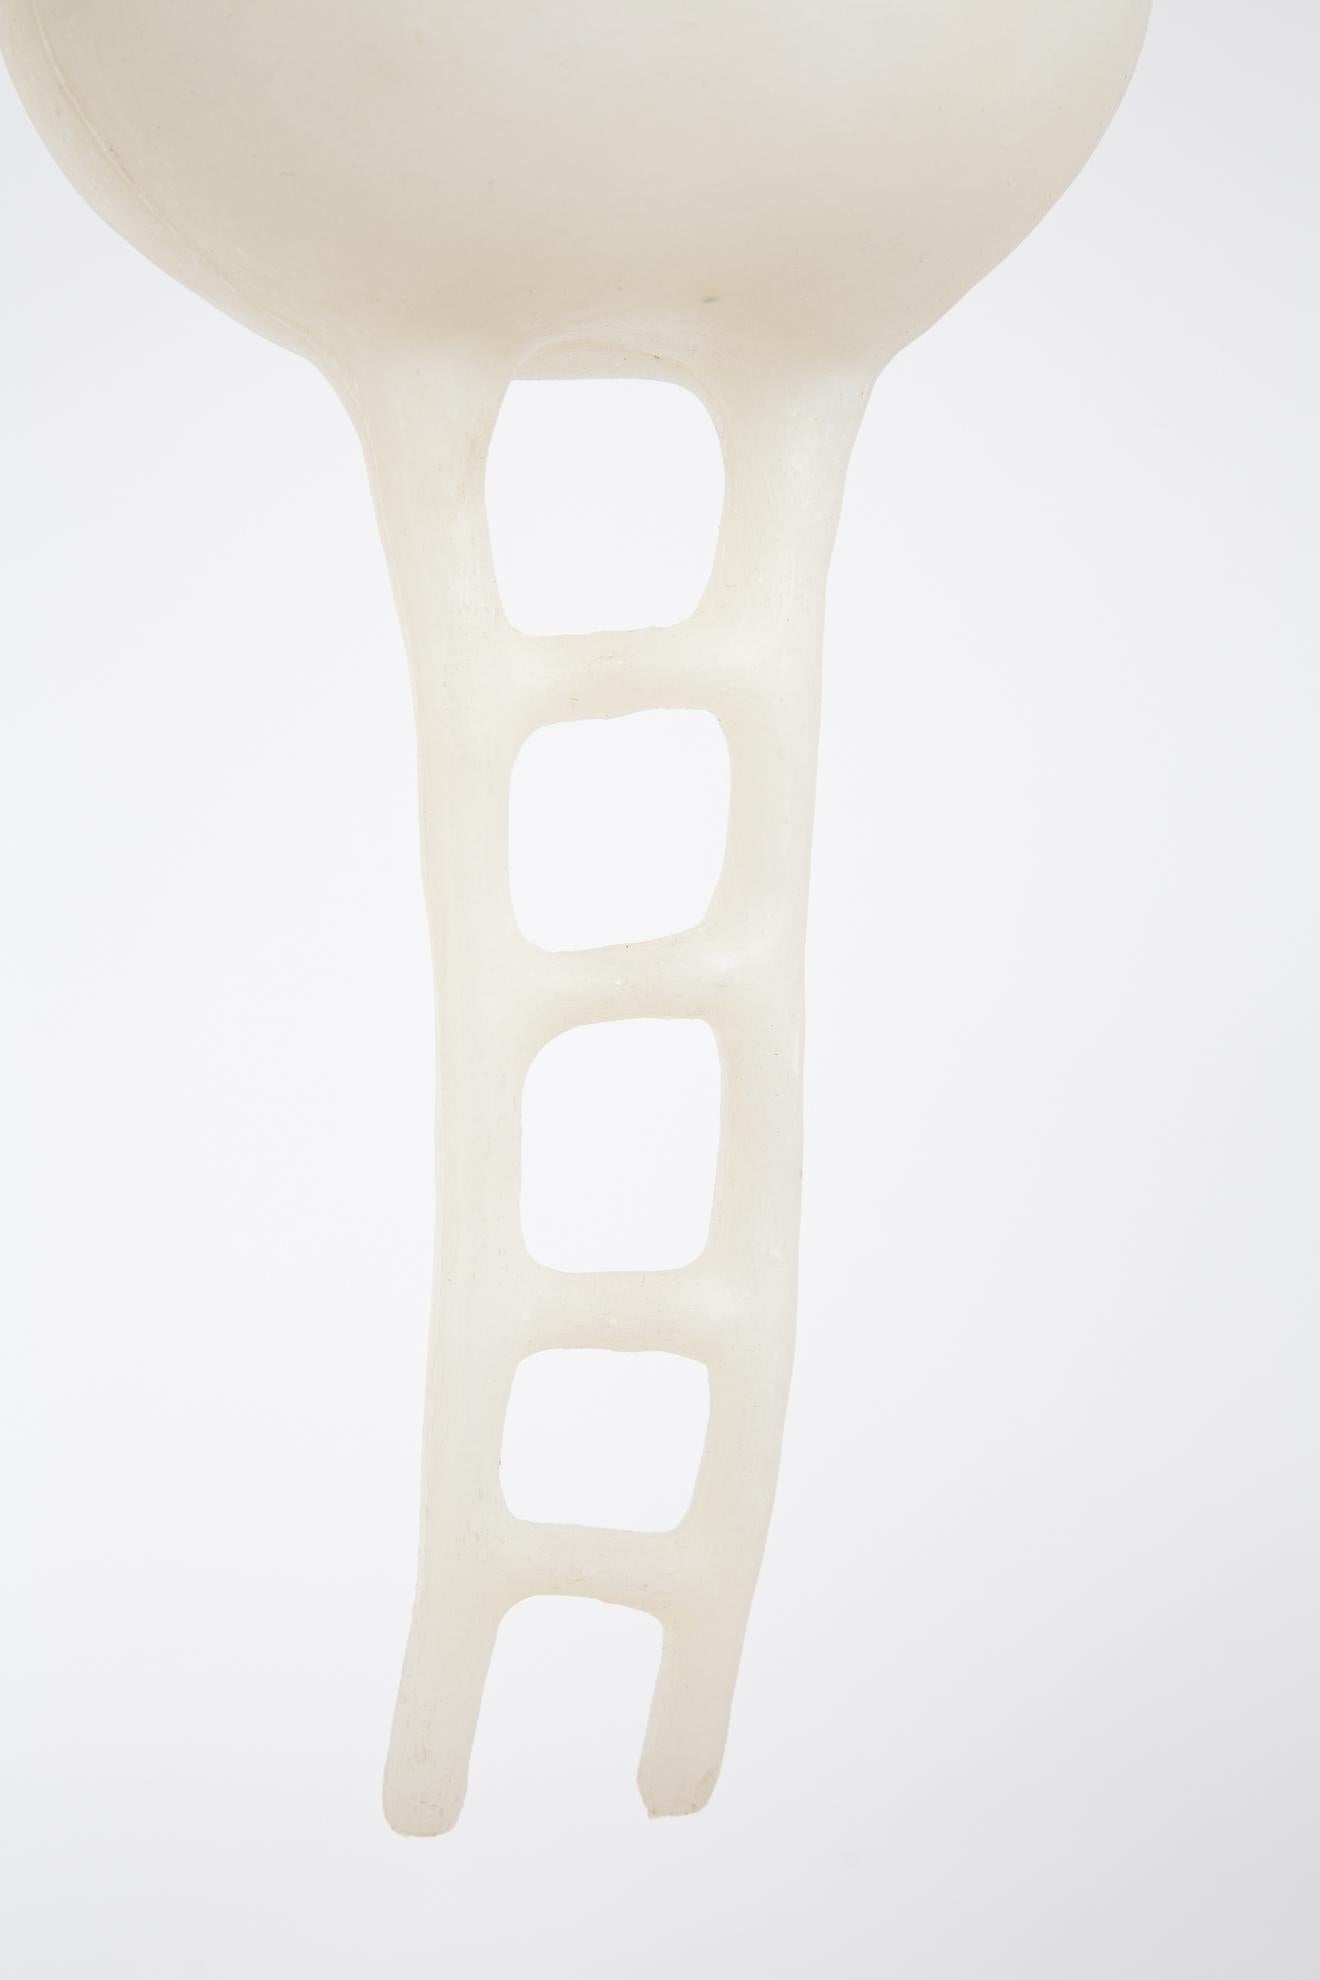 Dutch Nacho Carbonell Silicone Ladder Hanging Lamp Silicon Limited Edition For Sale